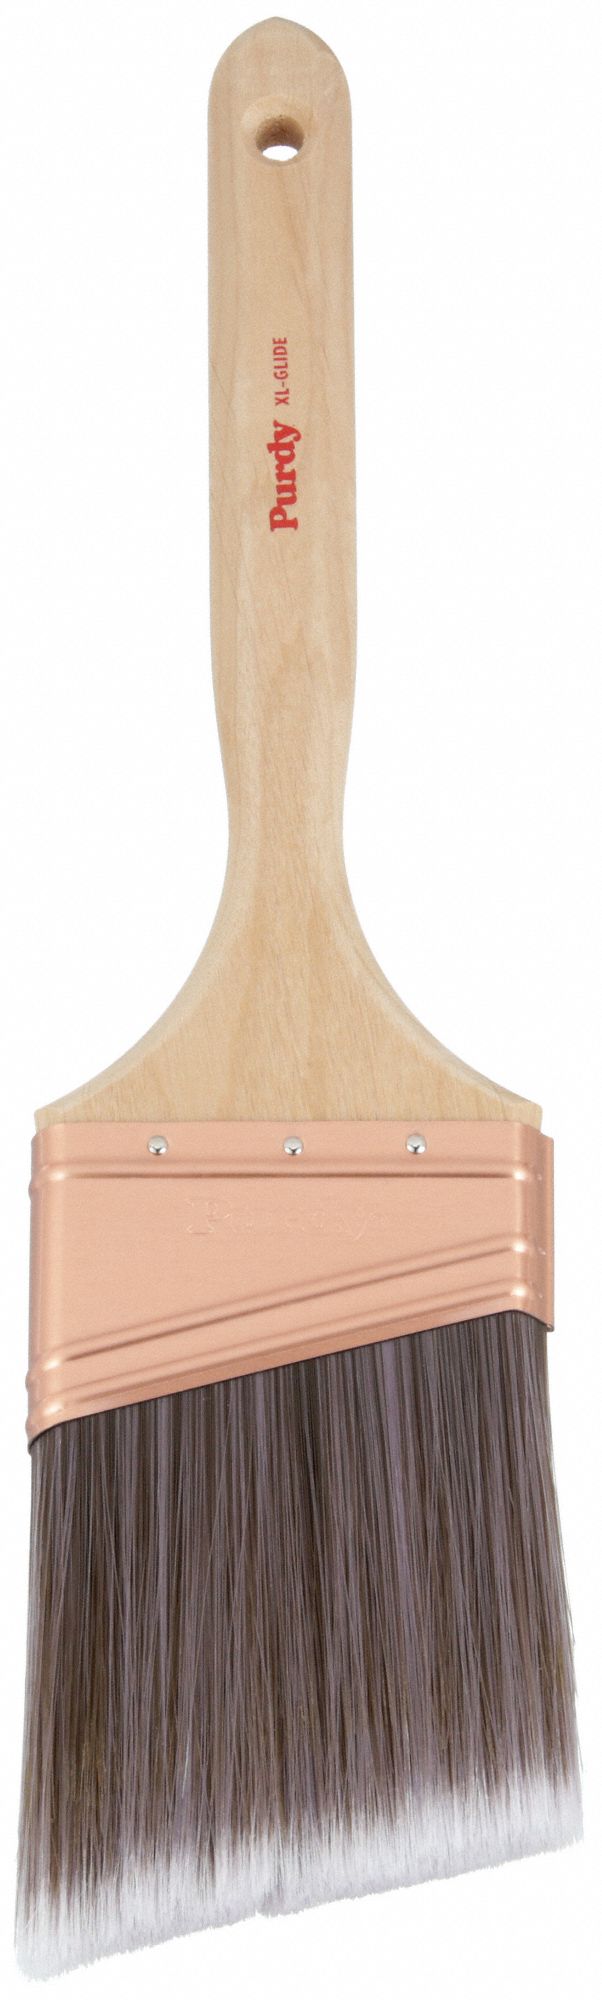 Purdy XL Glide Brush-Angle Sash - Southern Paint & Supply Co.